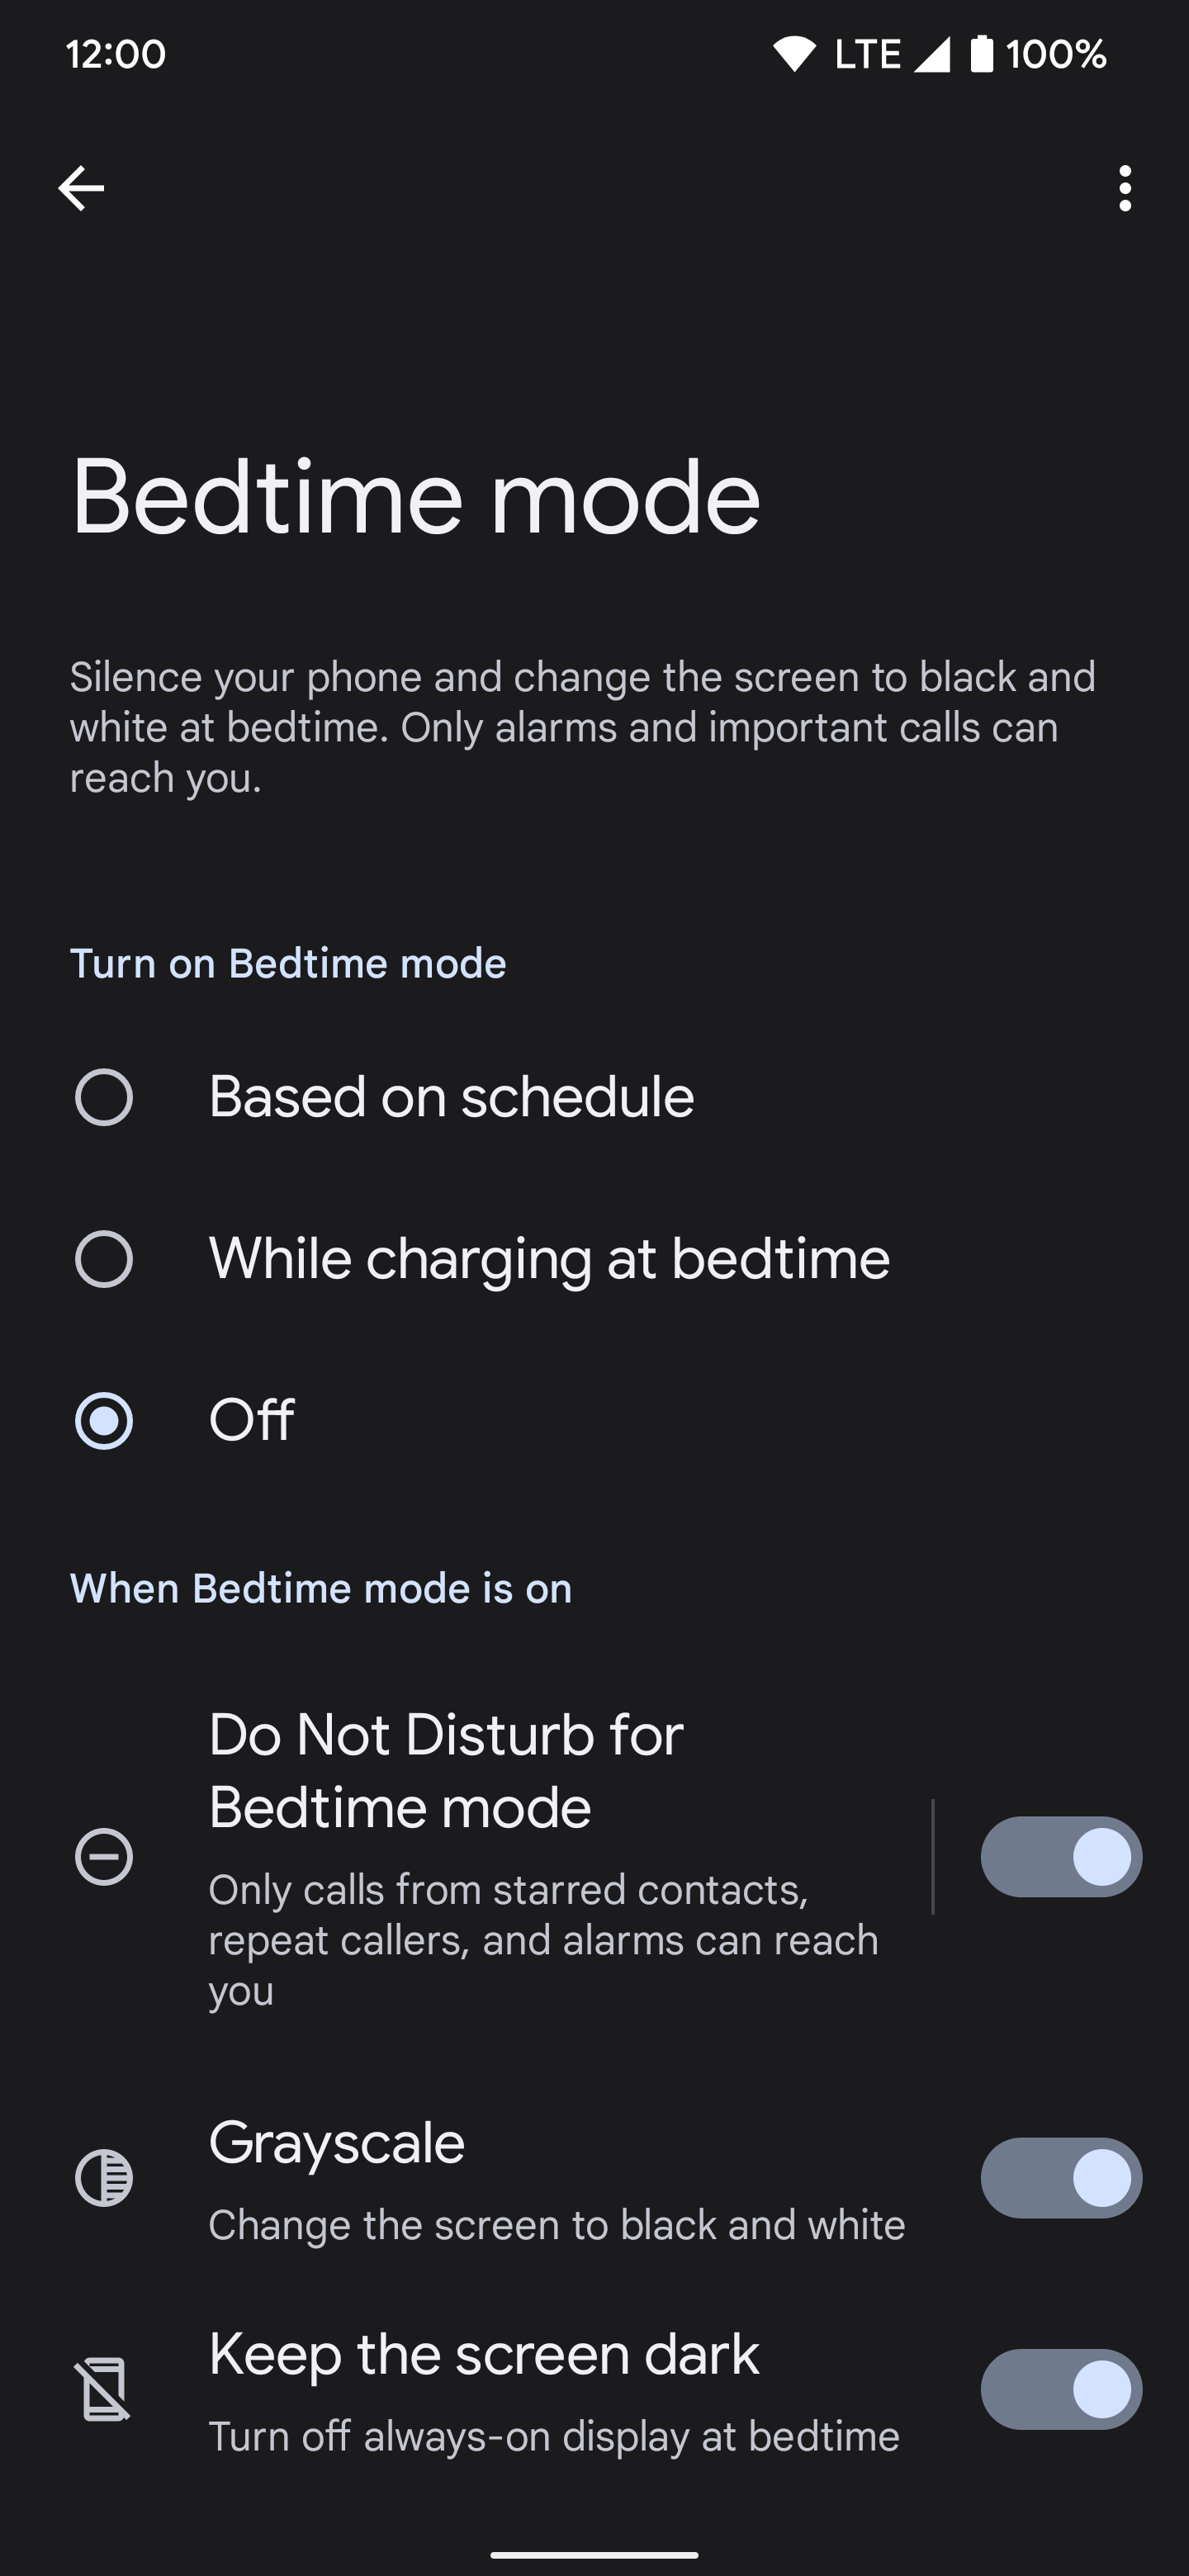 Screenshot shows Bedtime mode settings page with various customization options.